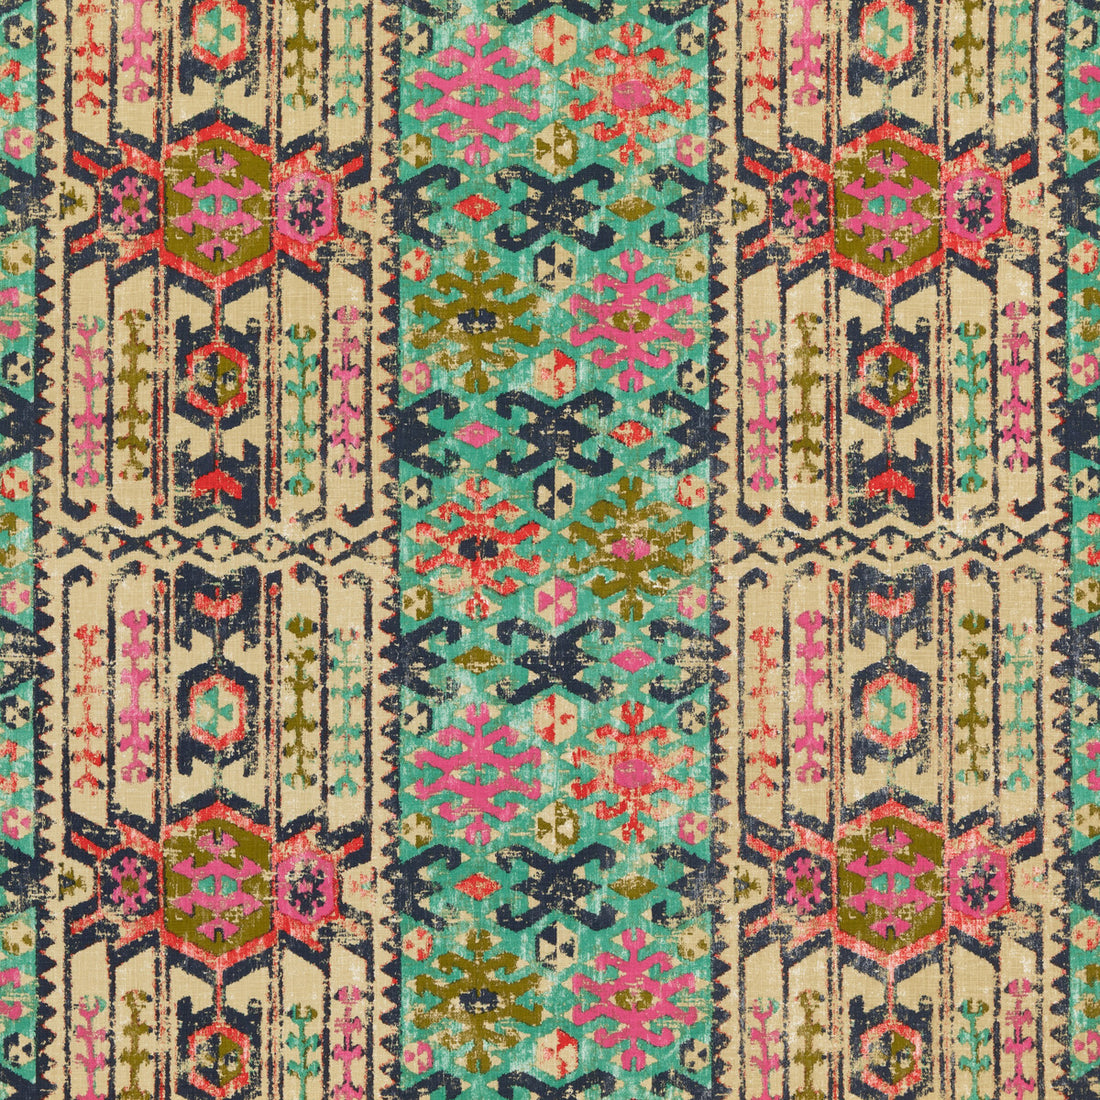 Kilver fabric in multi color - pattern FD309.Y101.0 - by Mulberry in the Modern Country I collection